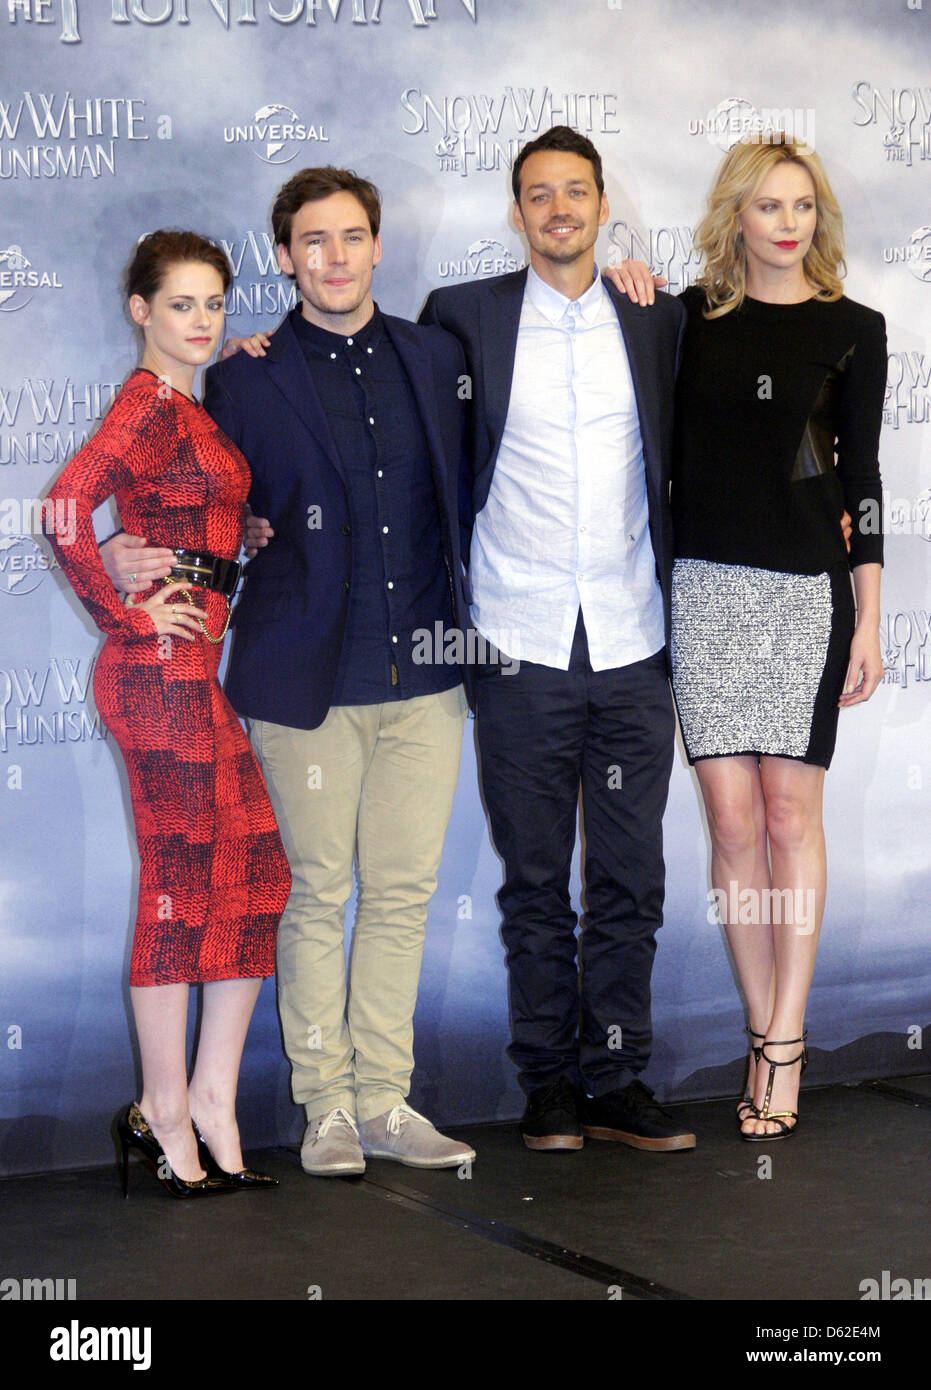 The actors Kristen Stewart (L-R), Sam Claflin, director Rupert Sanders and Charlize Theron pose for the cameras during a photocall and a fan event for the movie 'Snow White and the Huntsman' in Berlin, Germany, 16 May 2012. The movie will be aired to German cinemas on 31 May 2012. Photo: Xamax Stock Photo